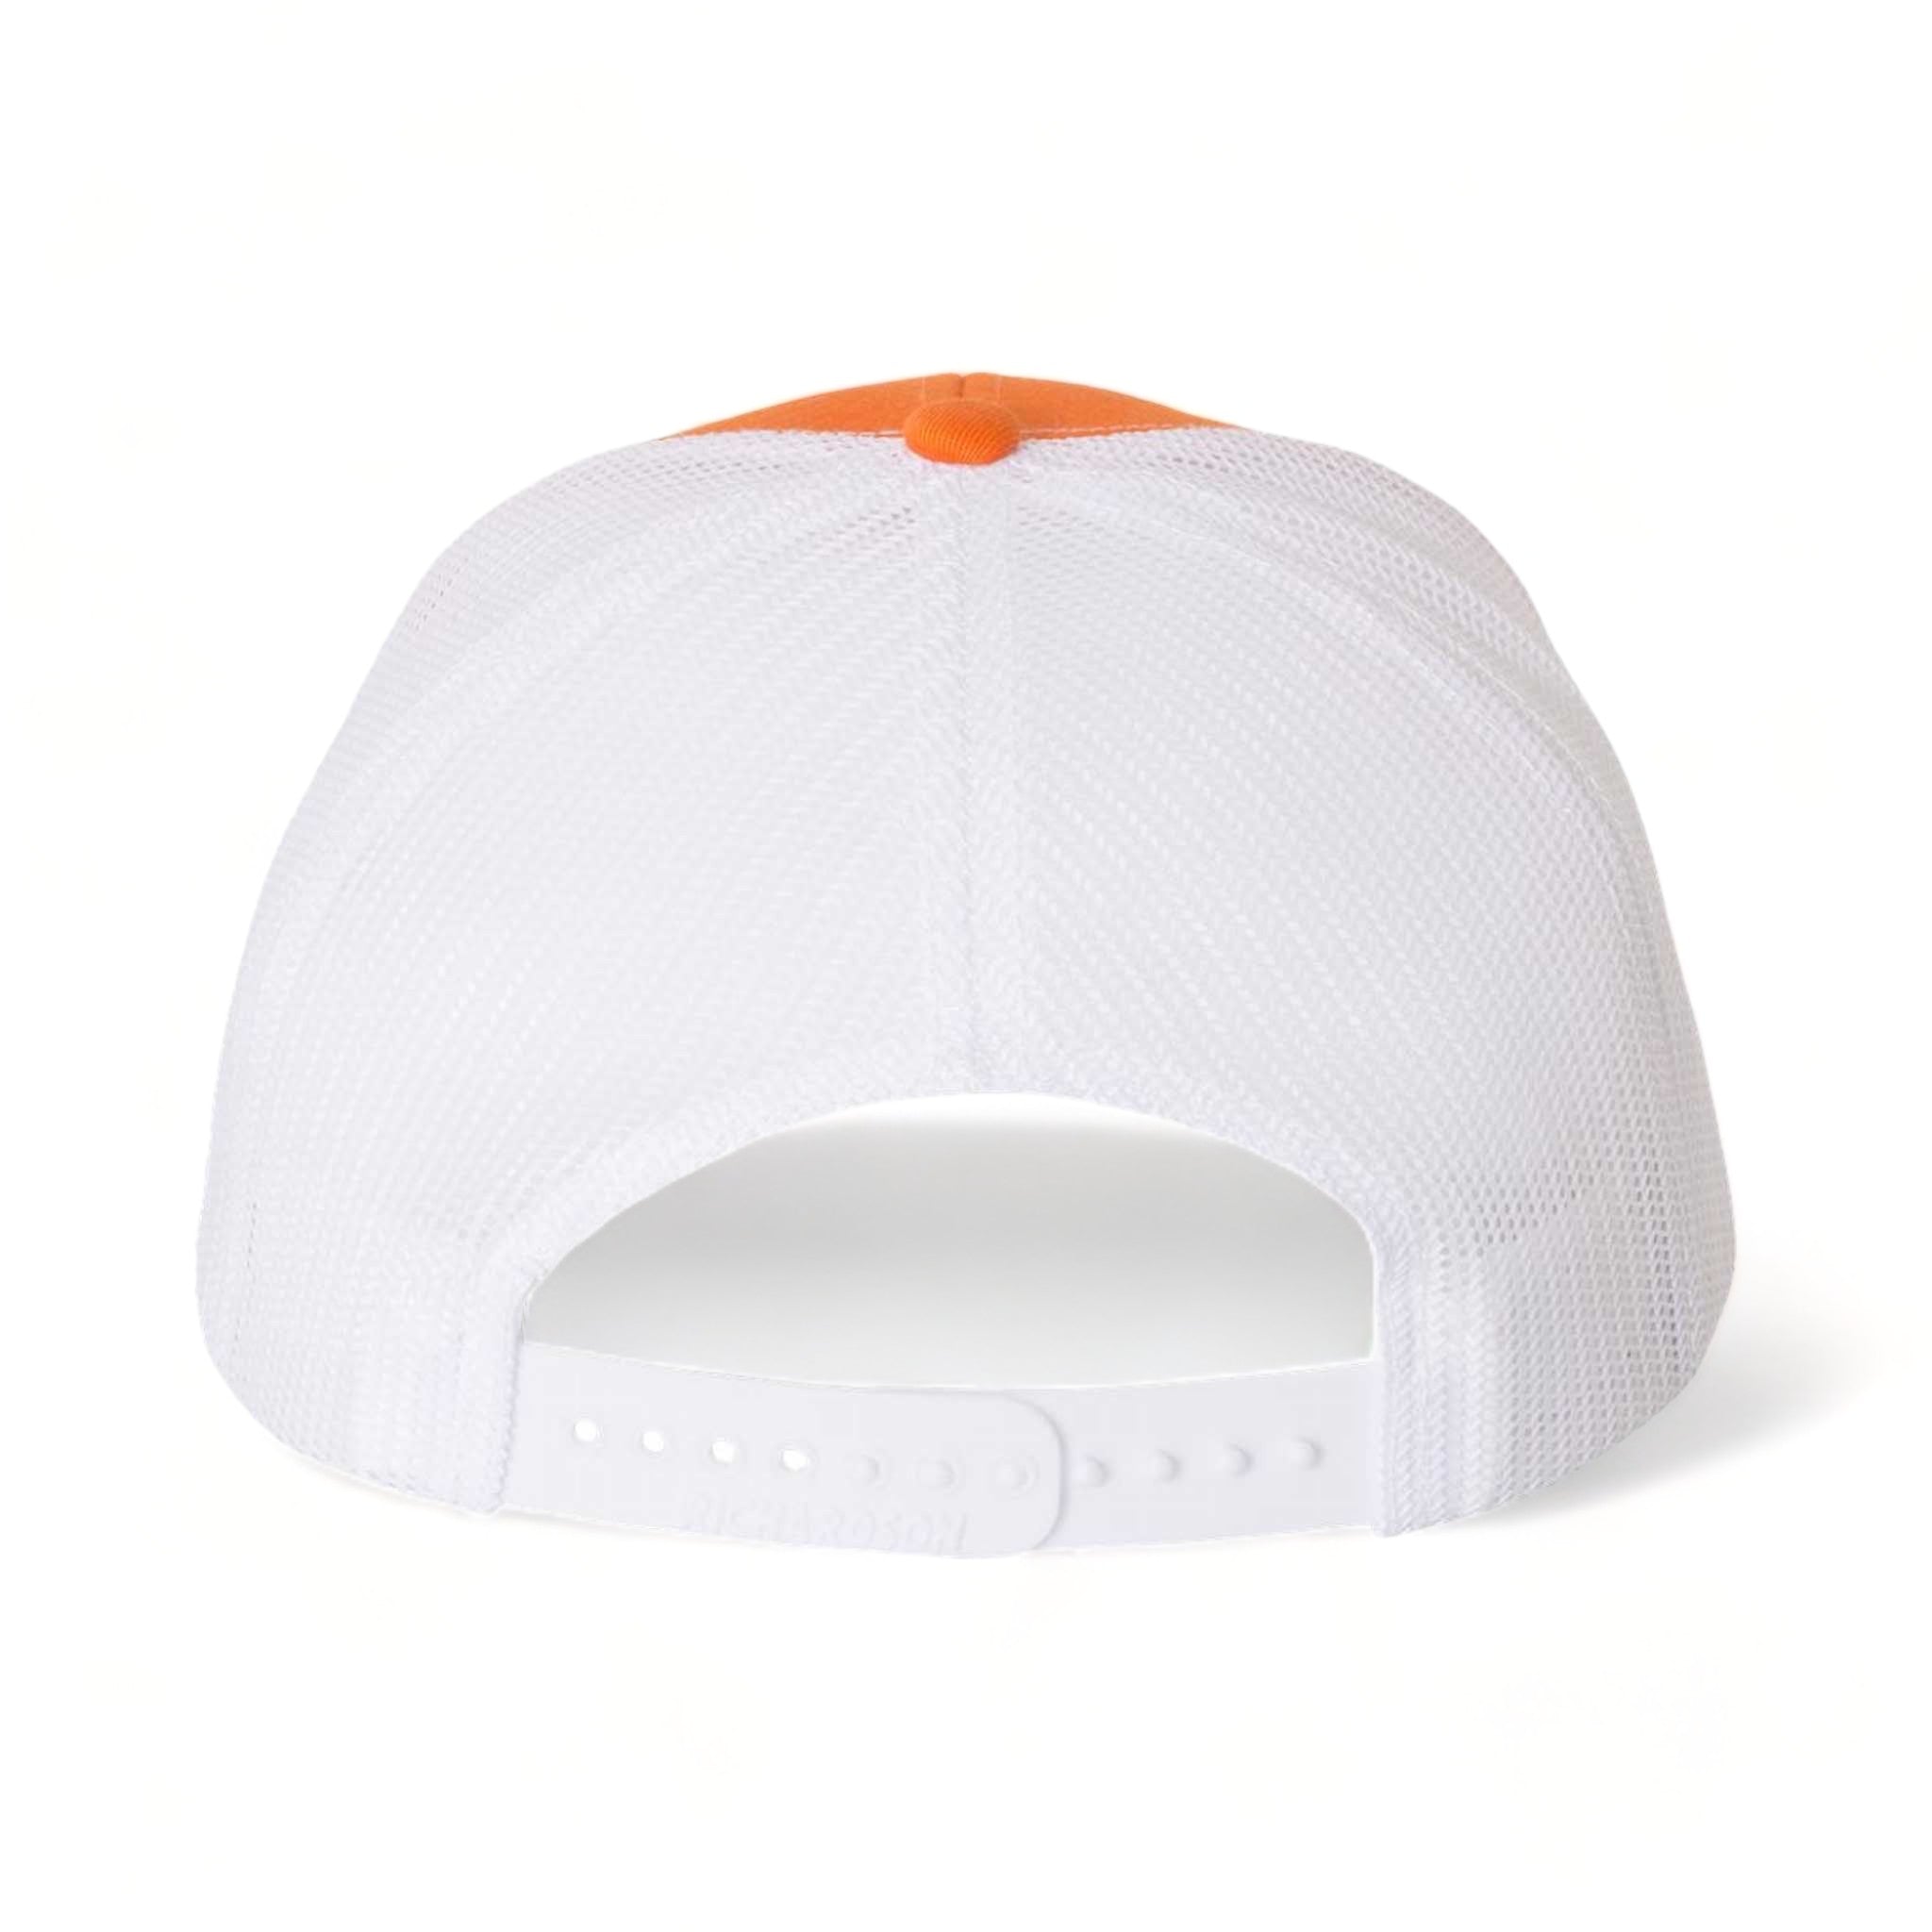 Back view of Richardson 112 custom hat in orange and white